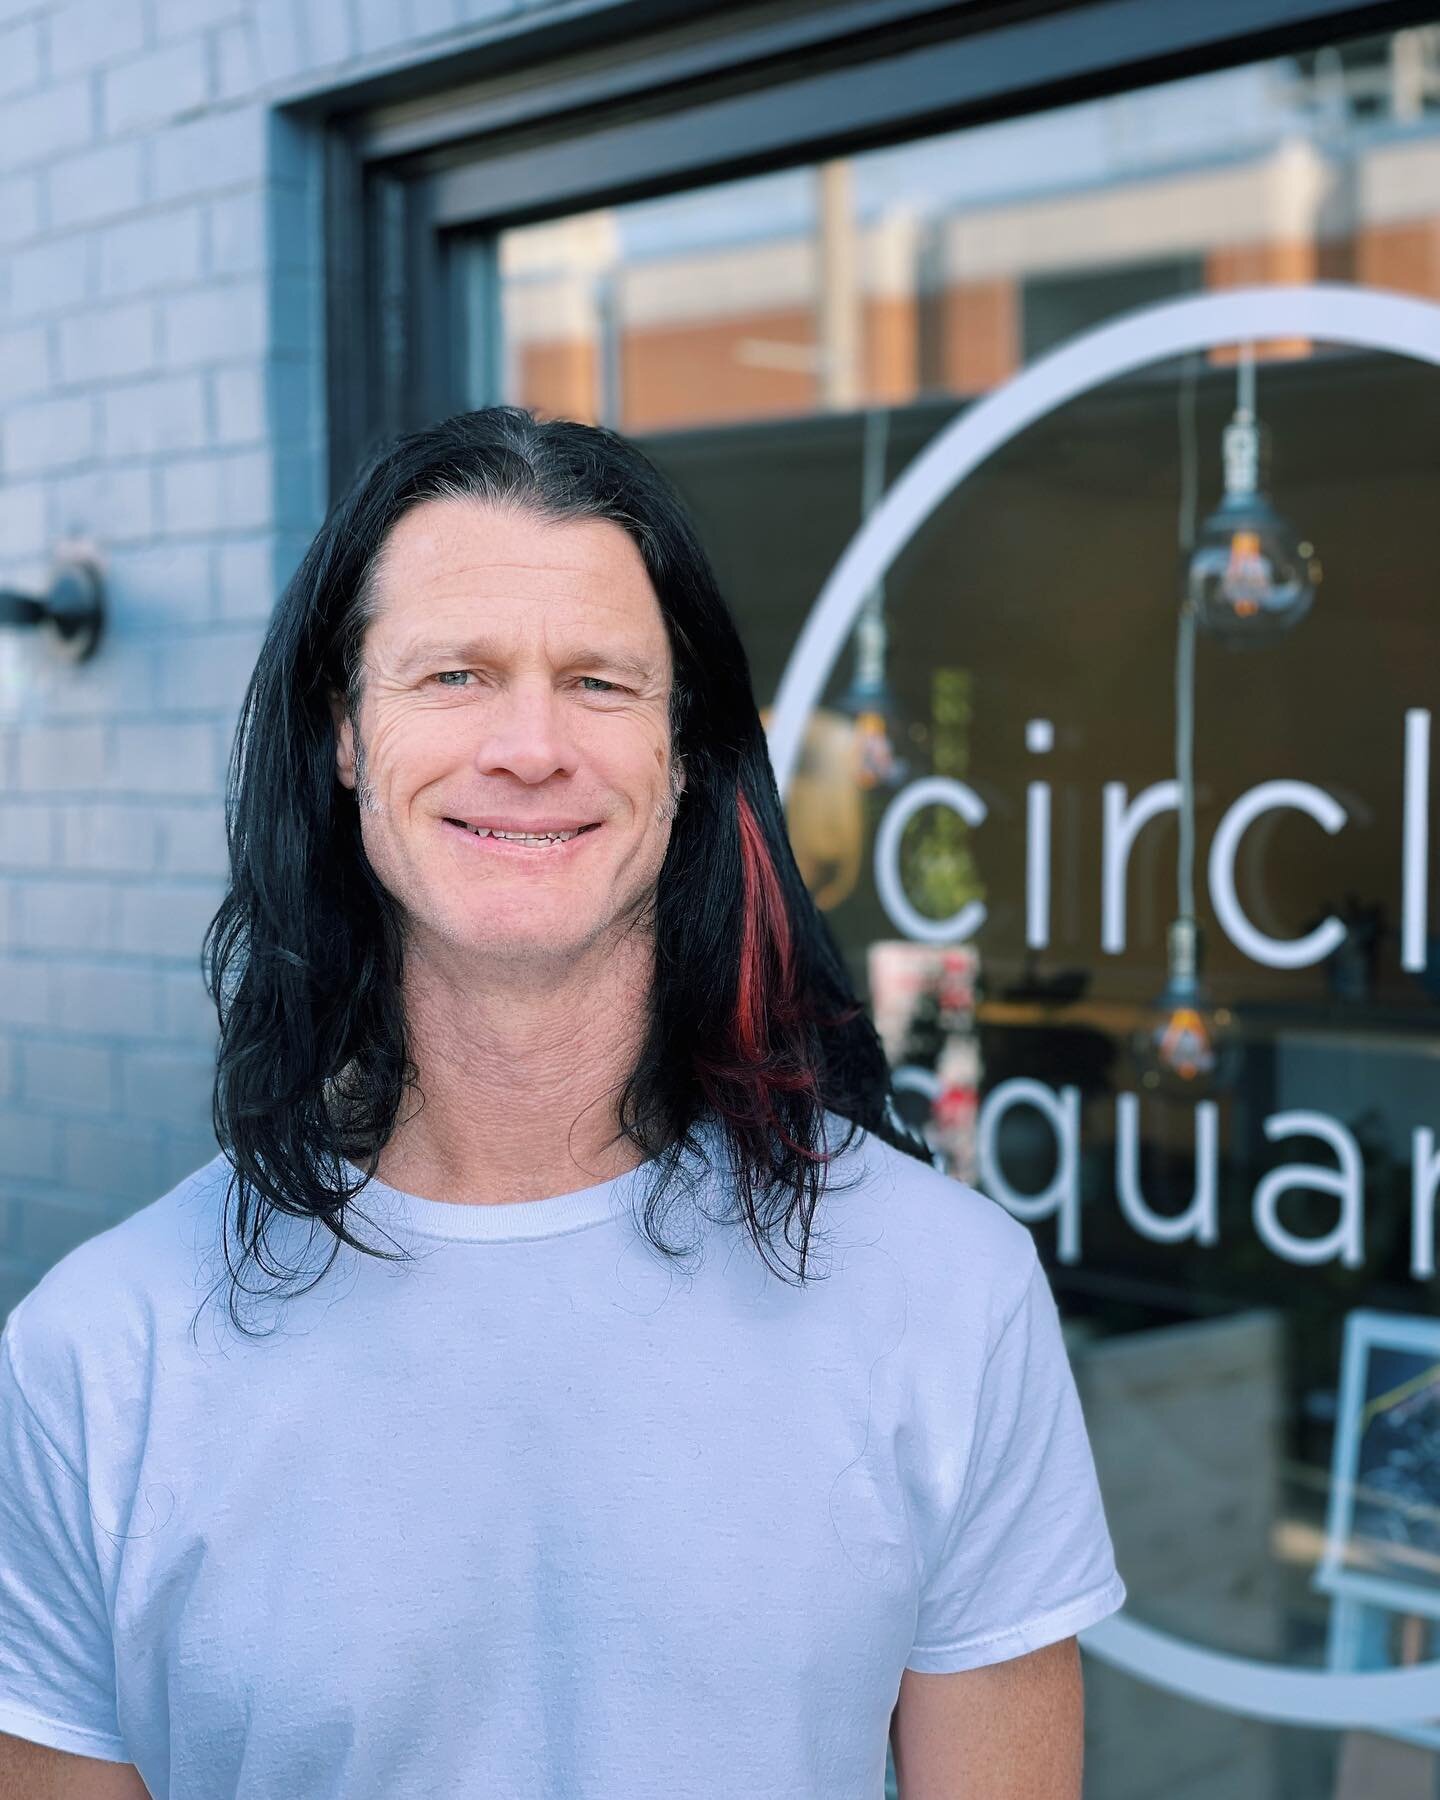 🌟MEET ANDY🌟
We are so excited to welcome Andy as a Stylist at Circle Square! Andy is a recent transplant from San Diego, and his mellow SoCal energy is unmistakable. He specializes in classic, precision hair cutting. In addition to almost 20 years 